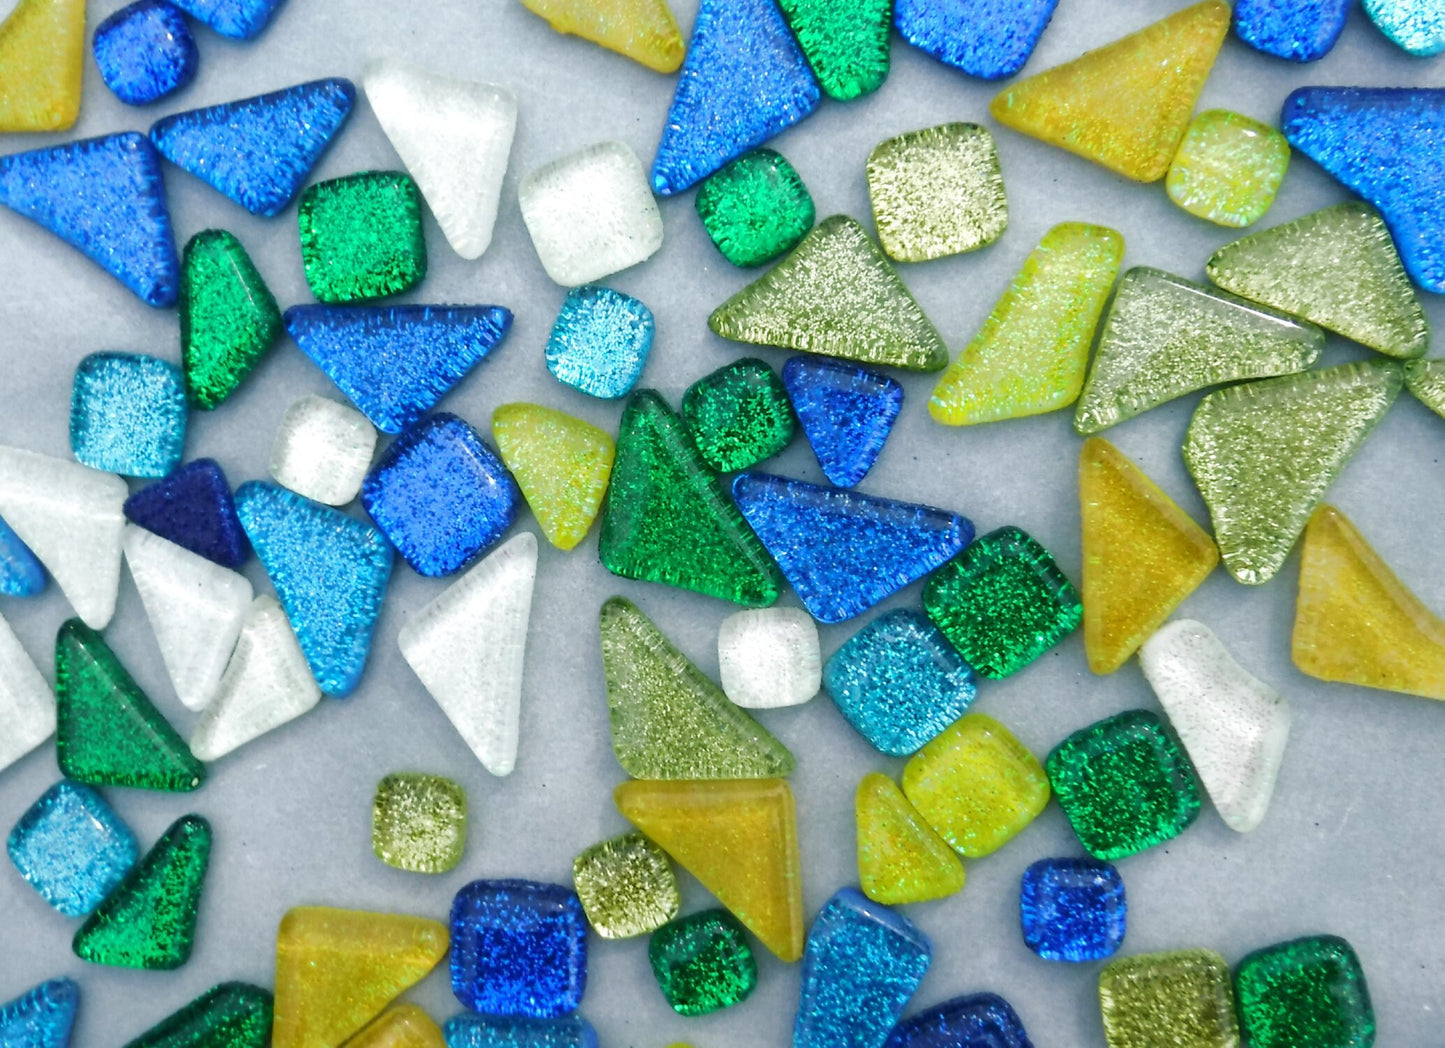 Rain Flower Glitter Puzzle Tiles - Assorted Shapes and Colors - 100 grams Mosaic Tiles Glass in Blues Greens Yellows and White